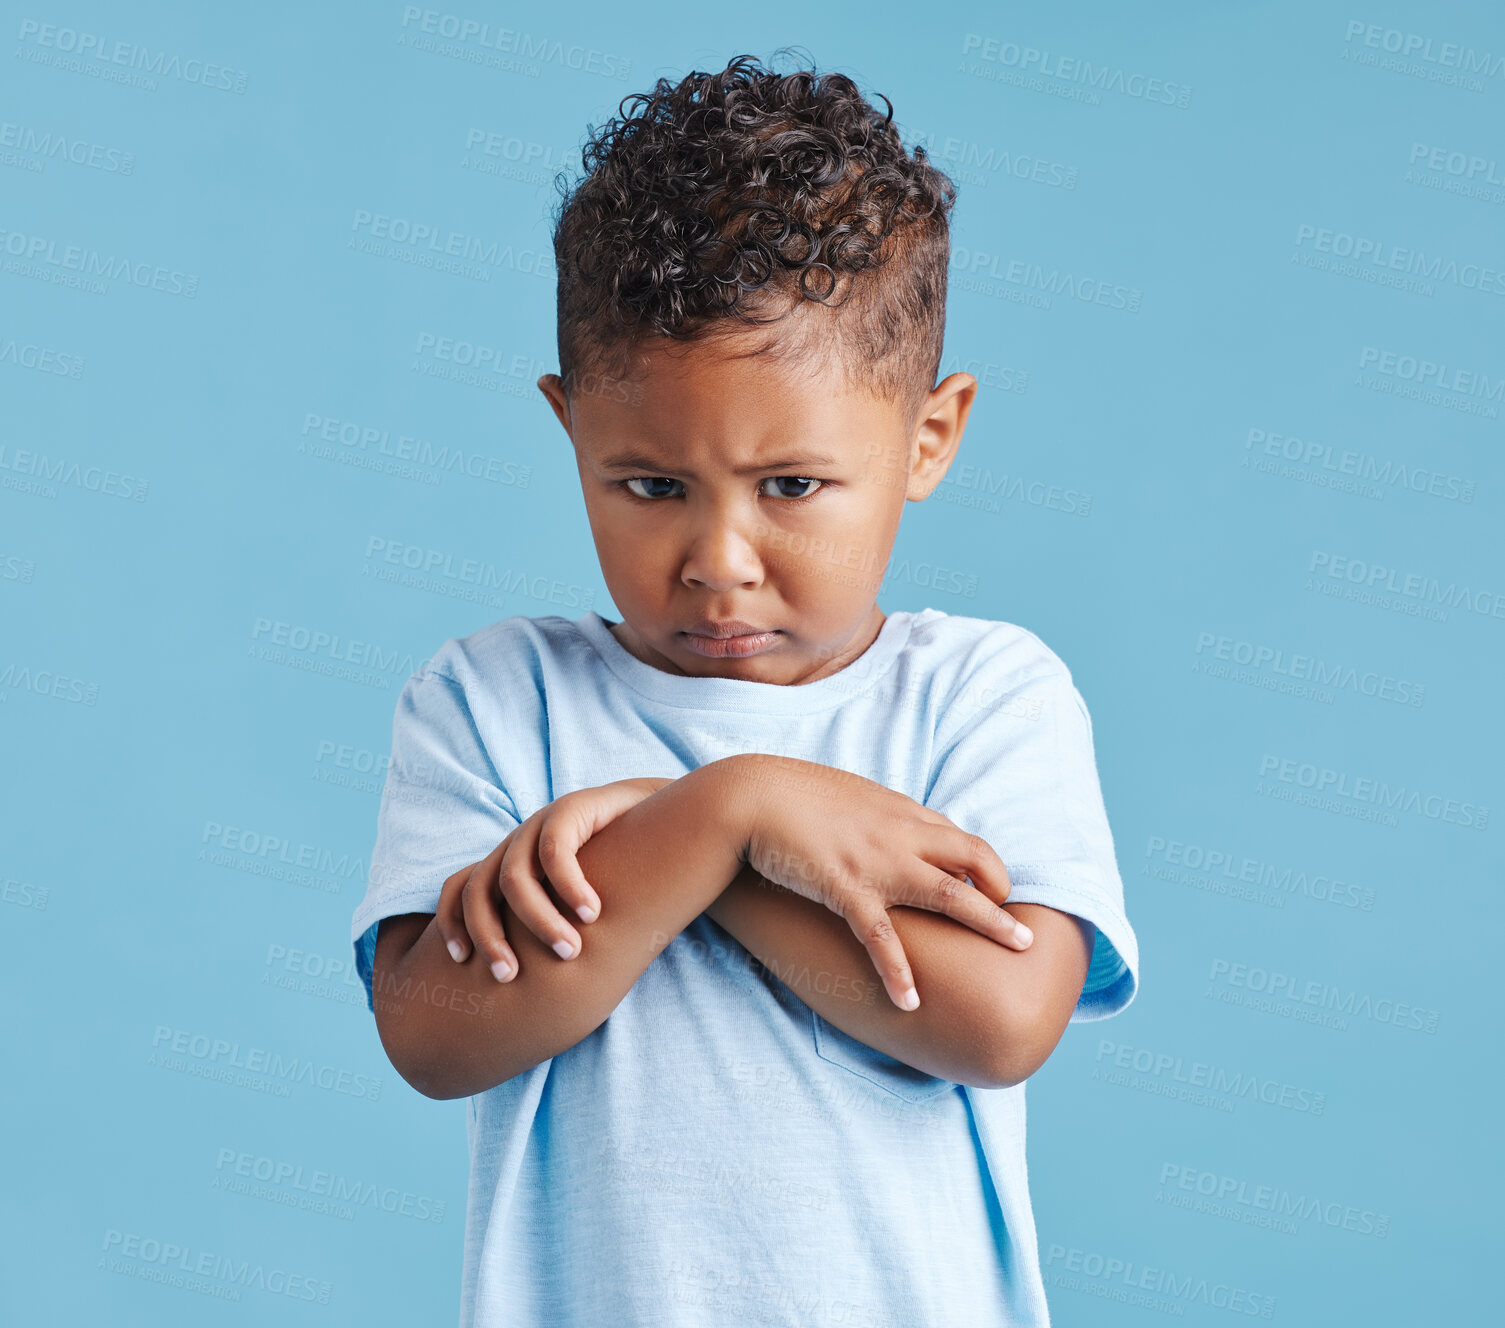 Buy stock photo Offended little hispanic boy looking sad and upset while standing against a blue studio background. Unhappy preschooler standing with his arms crossed and looking down